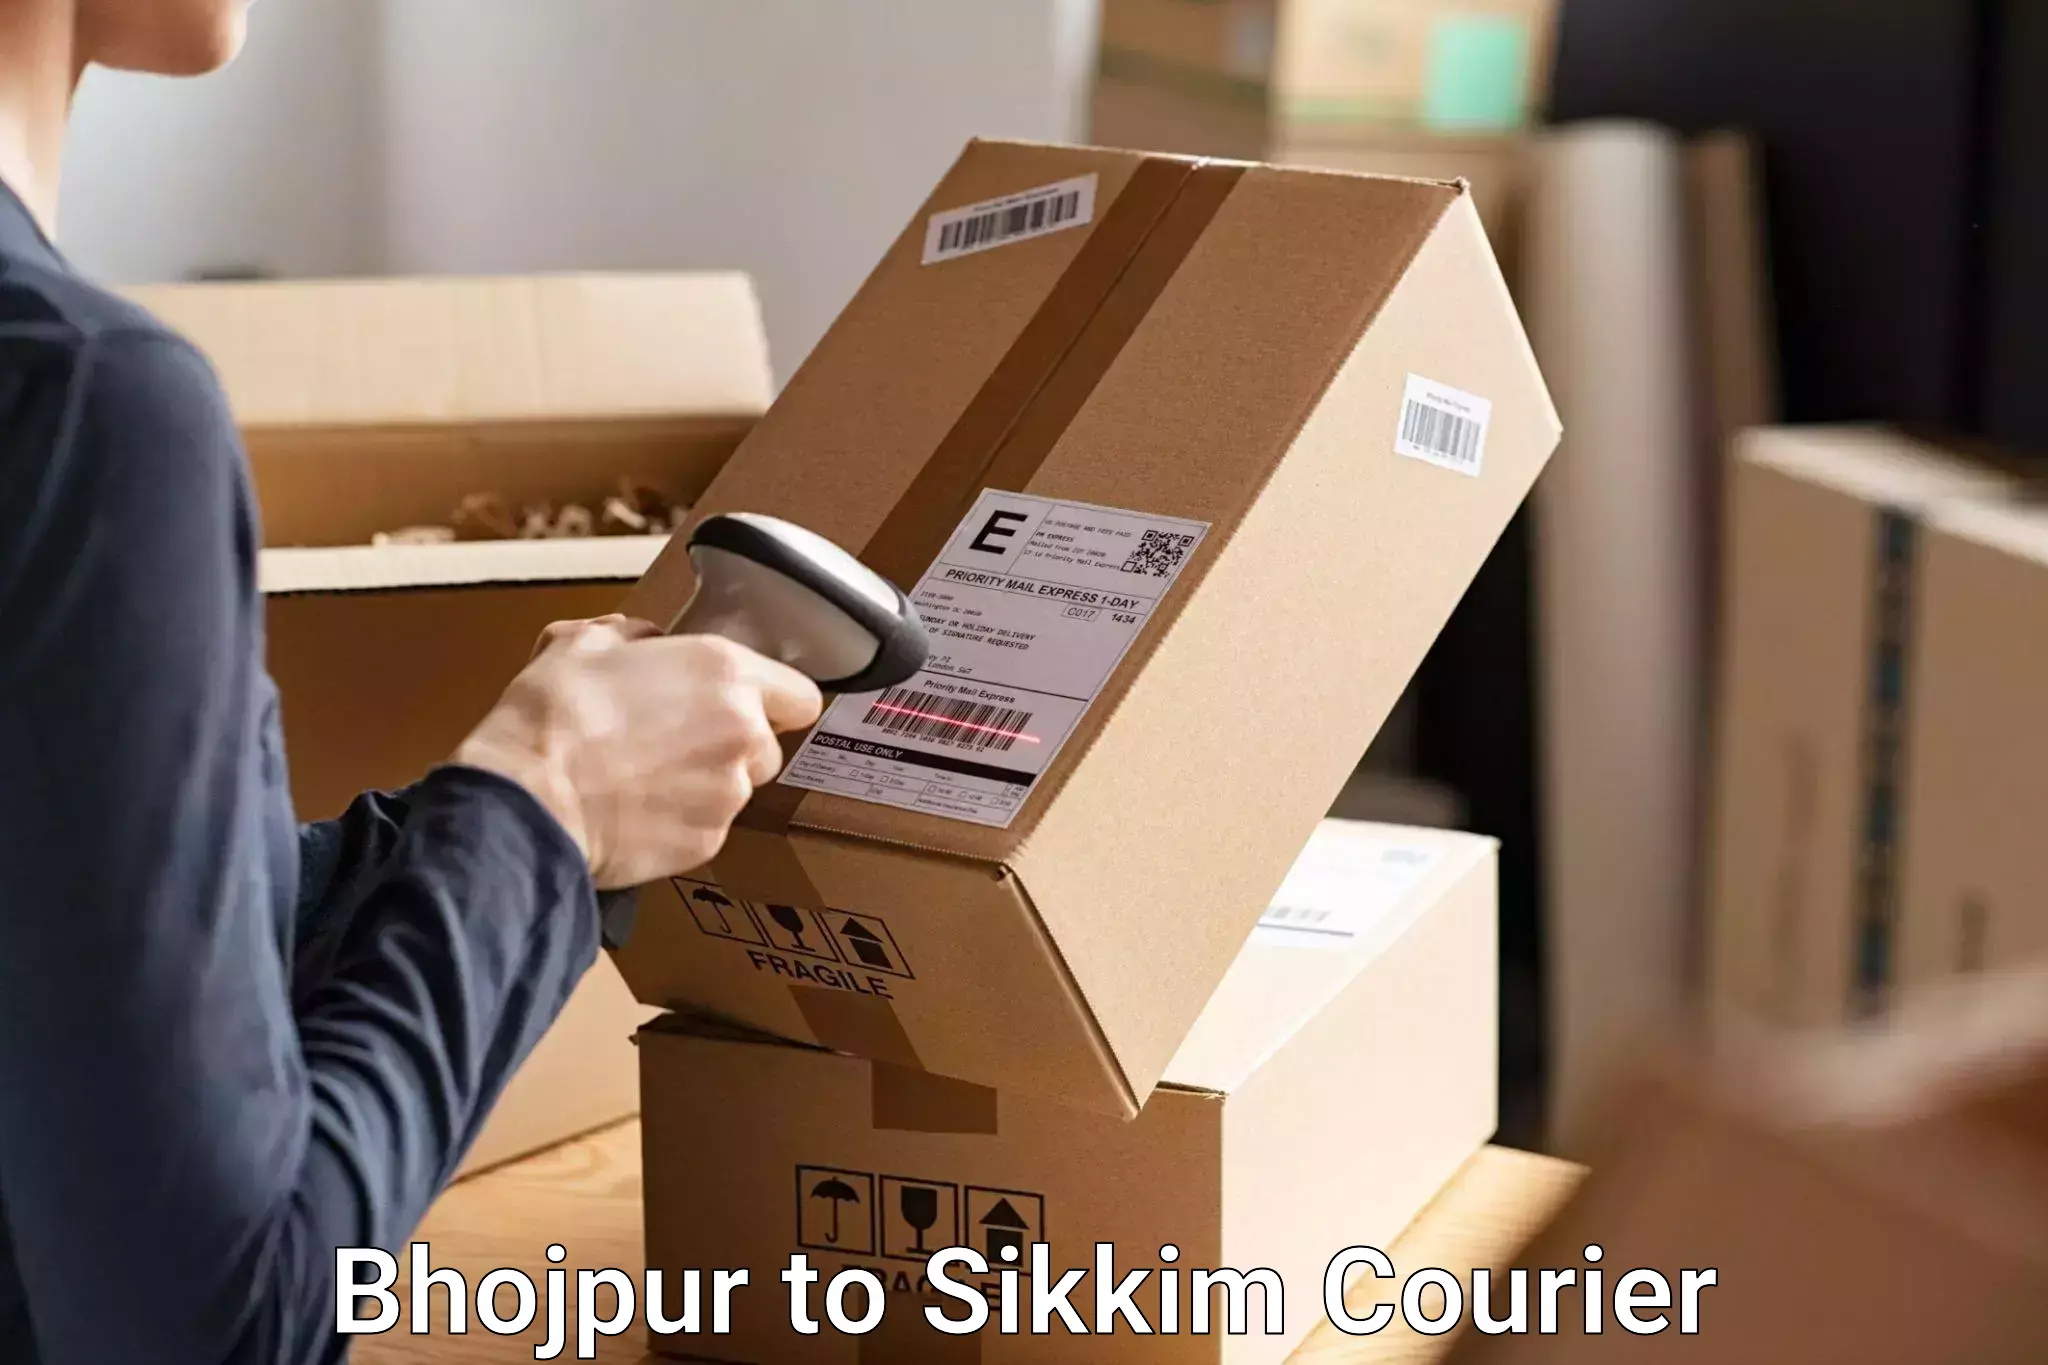 Luggage shipment tracking in Bhojpur to Jorethang